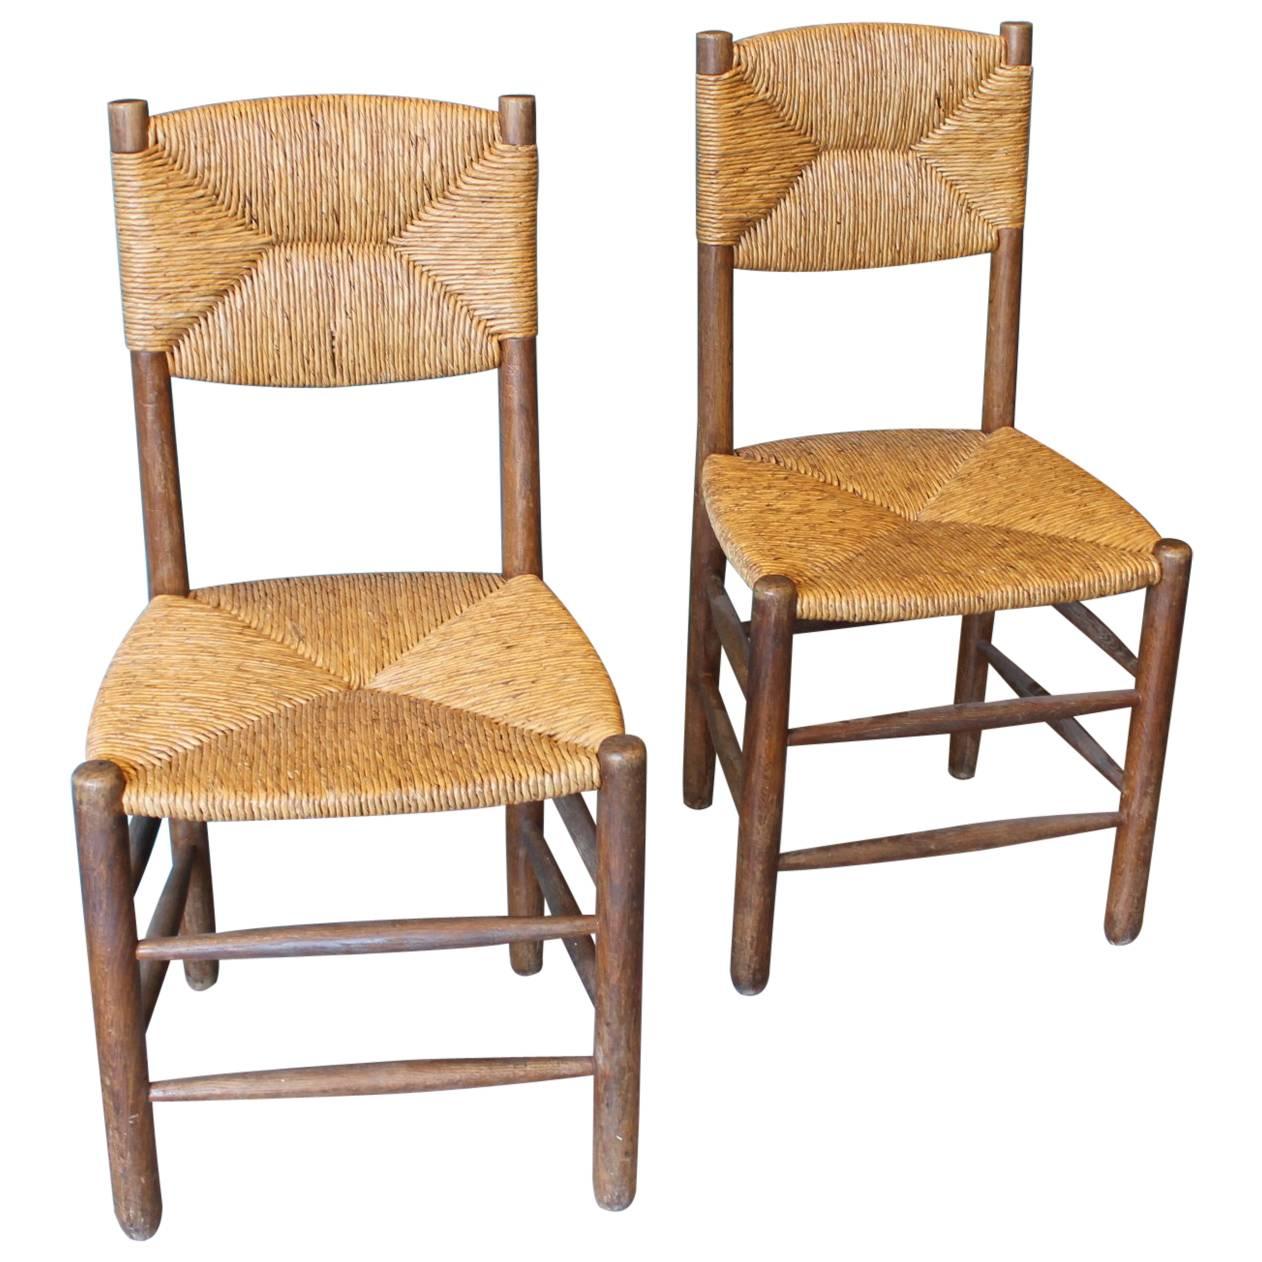 Charlotte Perriand Beautiful Pair of Woven Straw Chairs, circa 1950 For Sale